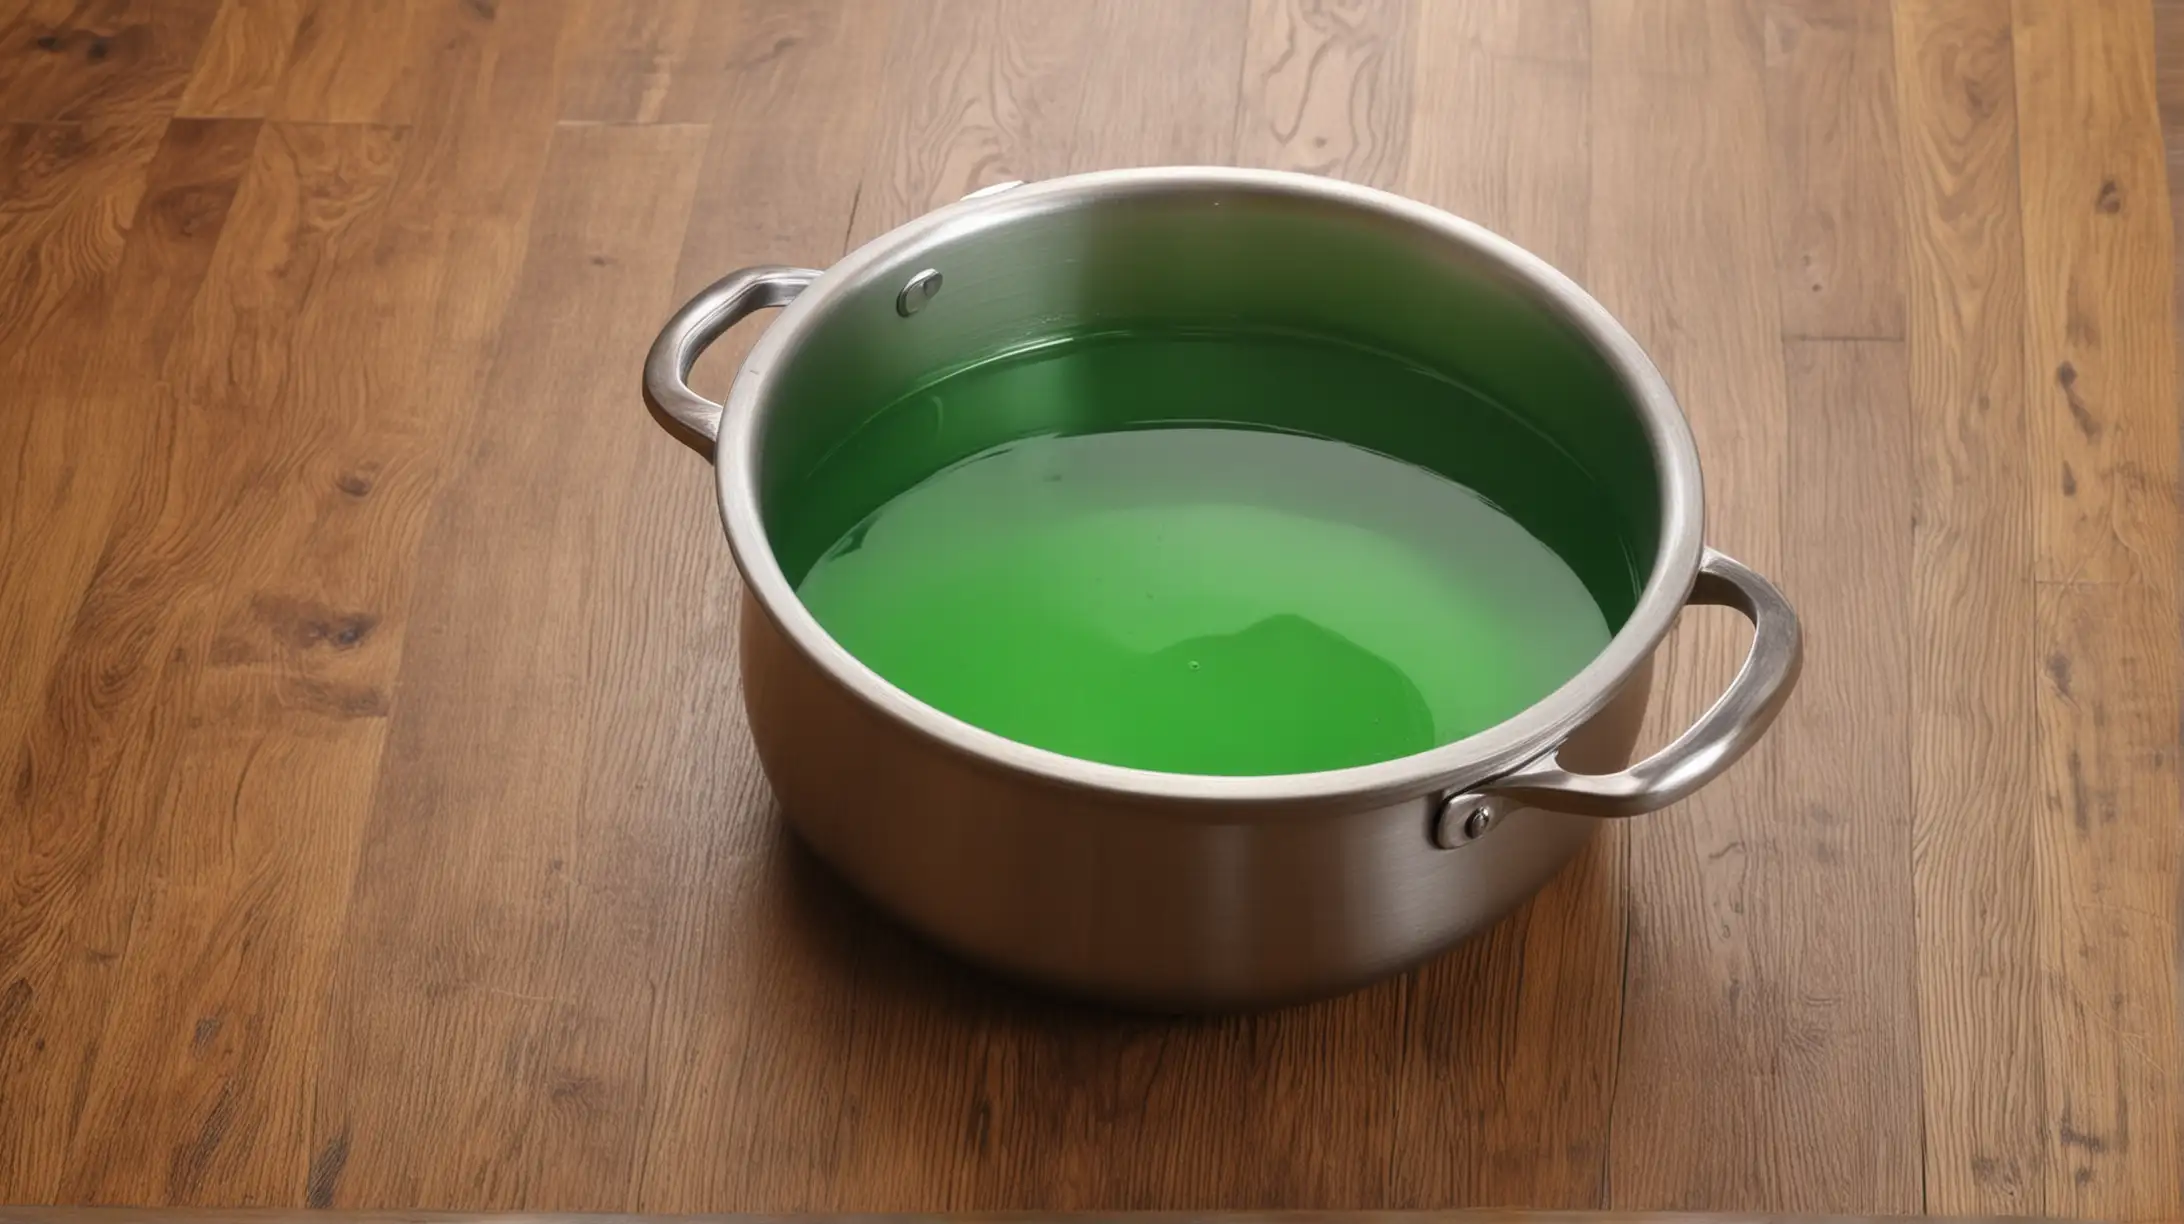 Shimmering Green Potion in a Boiling Pot on Wooden Floor